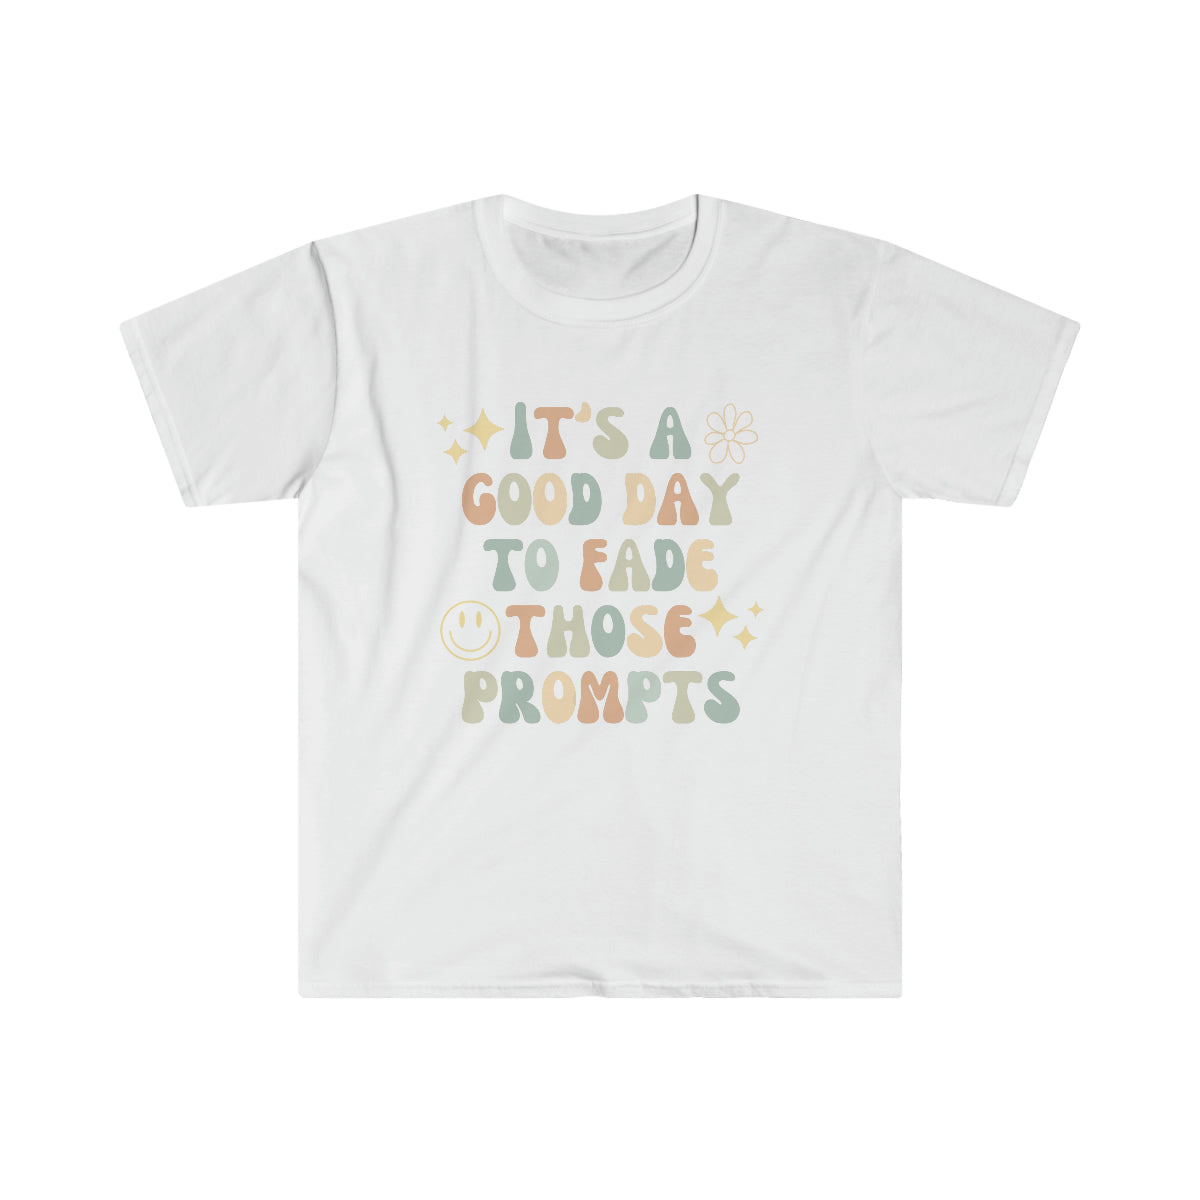 It's a Good Day to Fade Prompts Shirt | Applied Behavior Analysis | Autism awareness | ABA Shirt | behavior analyst | behavior therapist